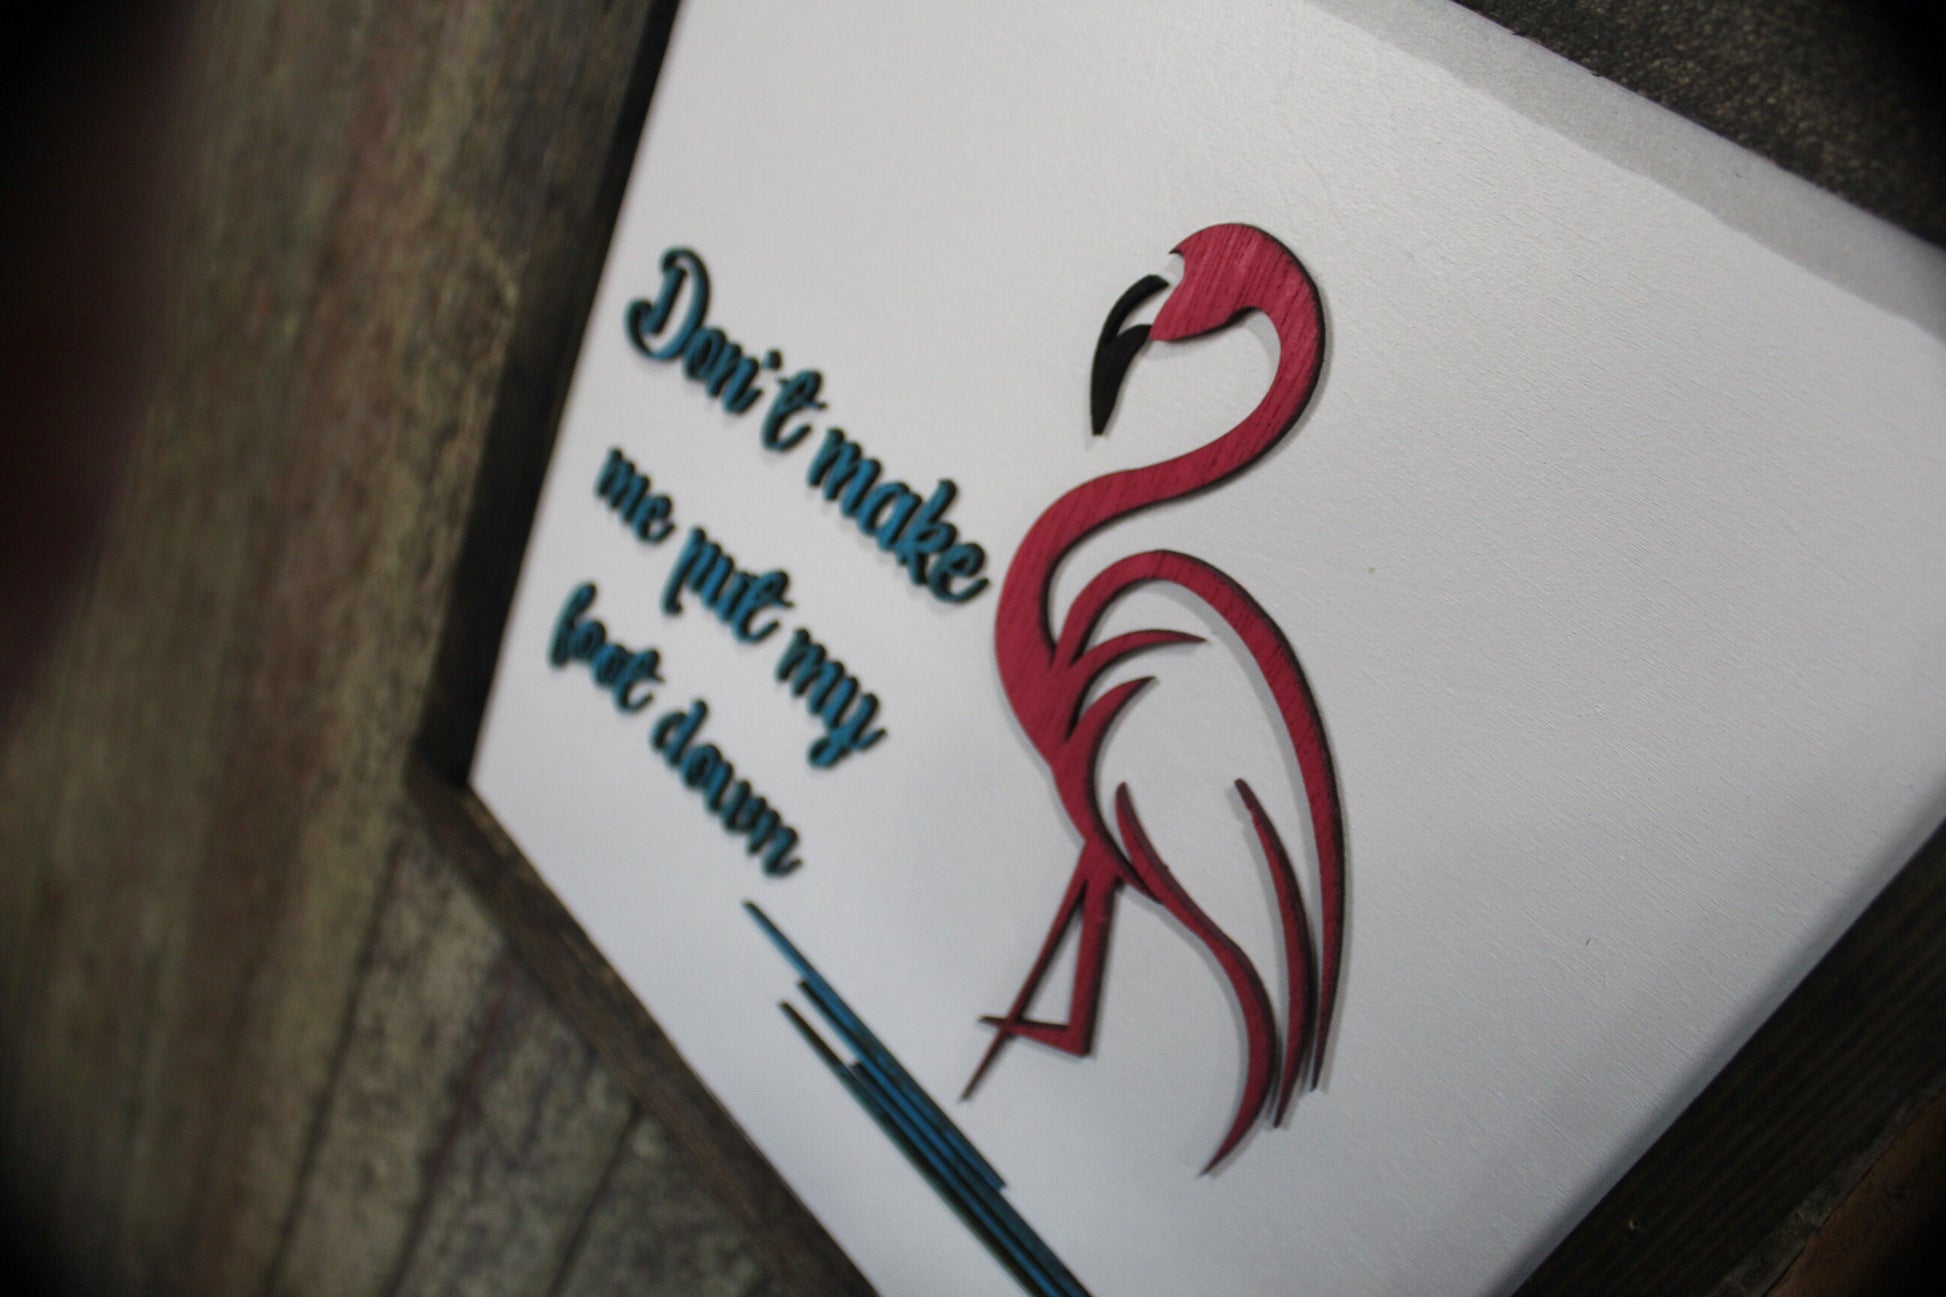 Flamingo Wood Sign Raised Image Don't Make Me Put My Foot Down Silly Stern Wall Hanging Bird Beach Ocean Decor Pink 3D Farmhouse Rustic